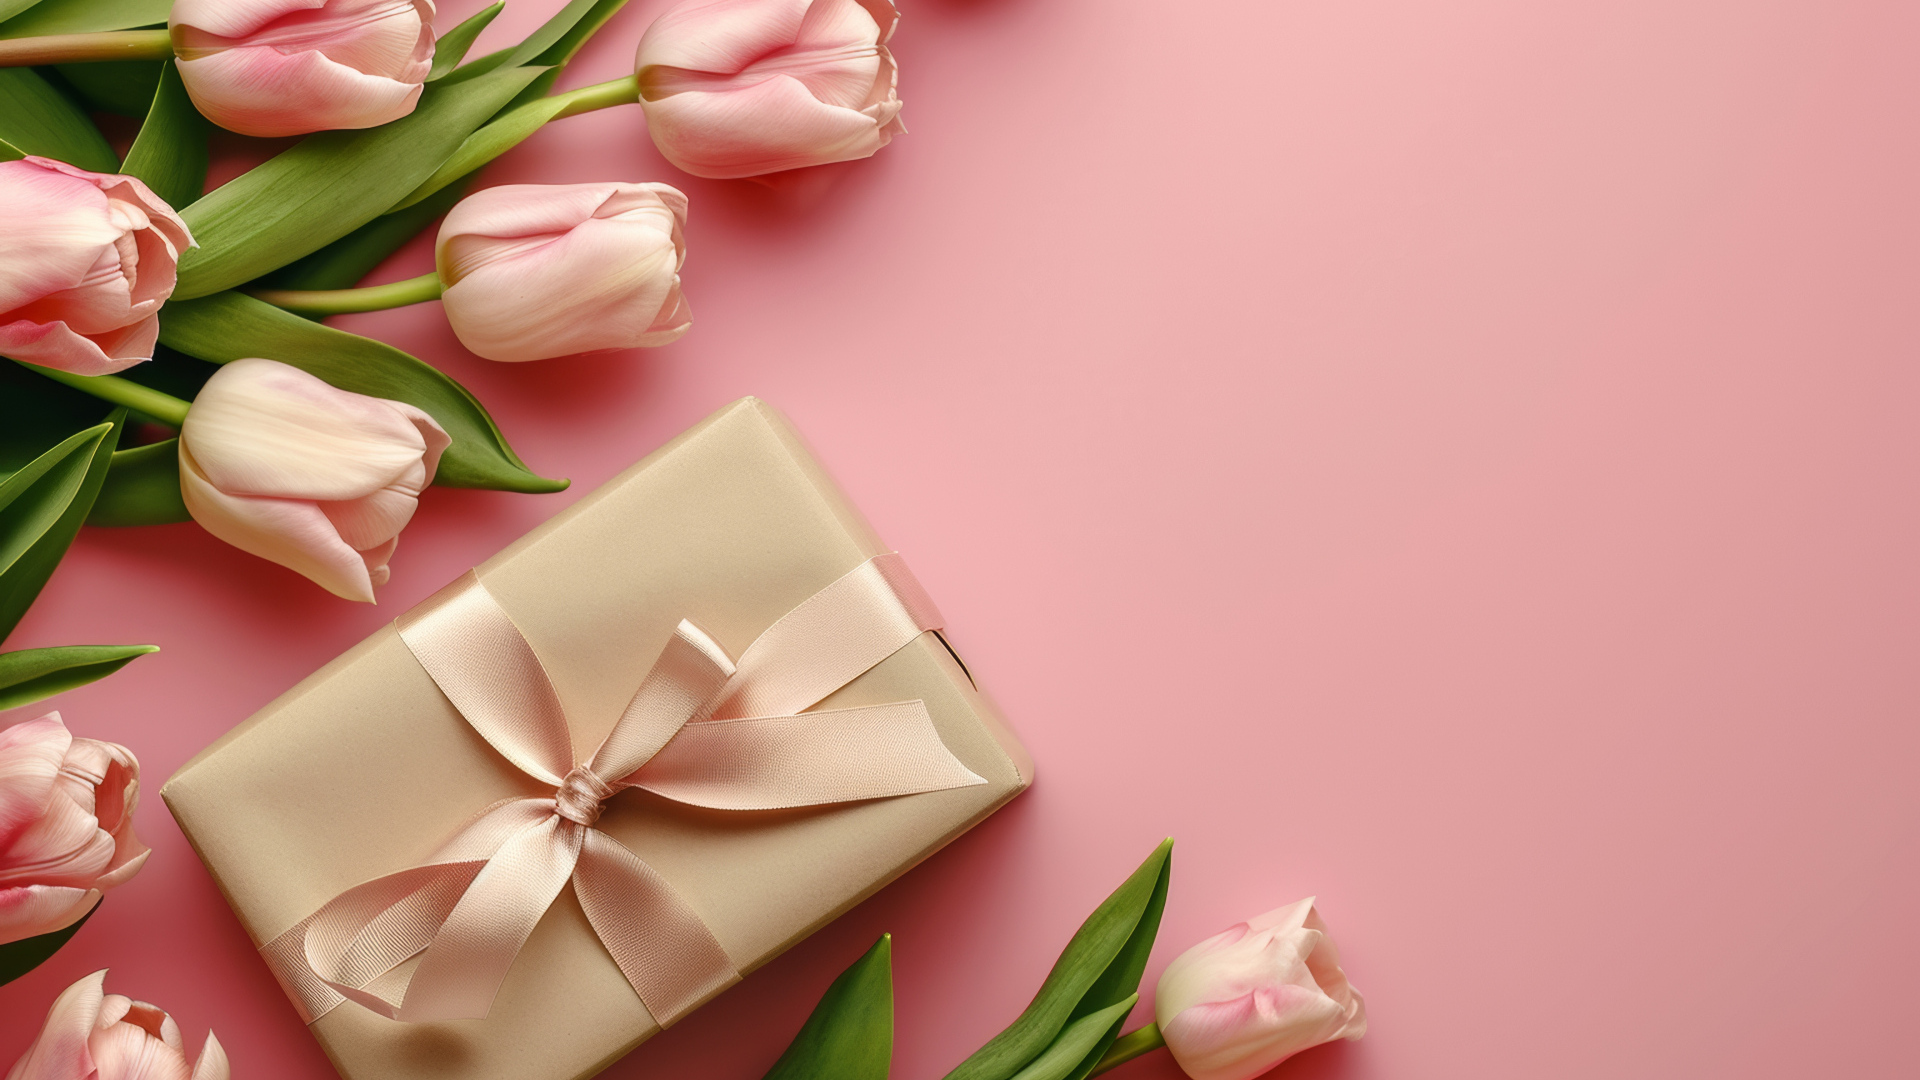 Gift with tulips for a loved one on a pink background